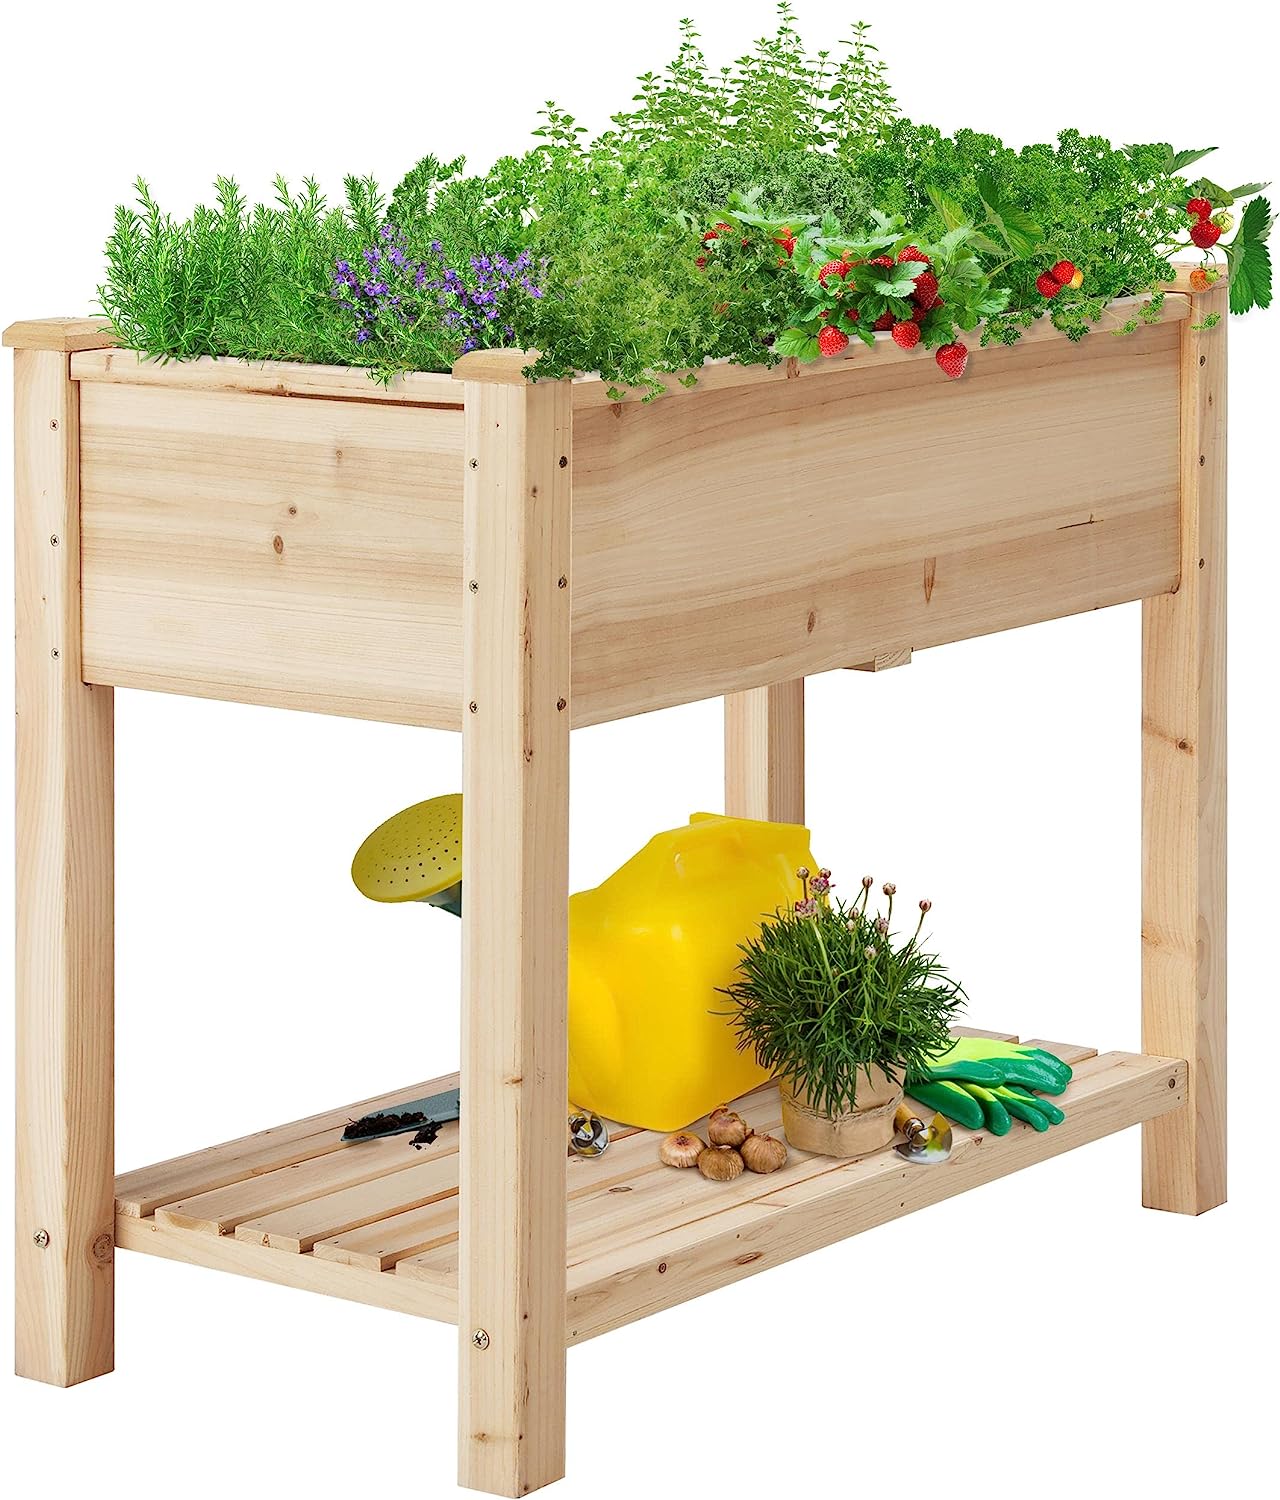 Yaheetech Raised Garden Bed Planter Box with Legs & [...]